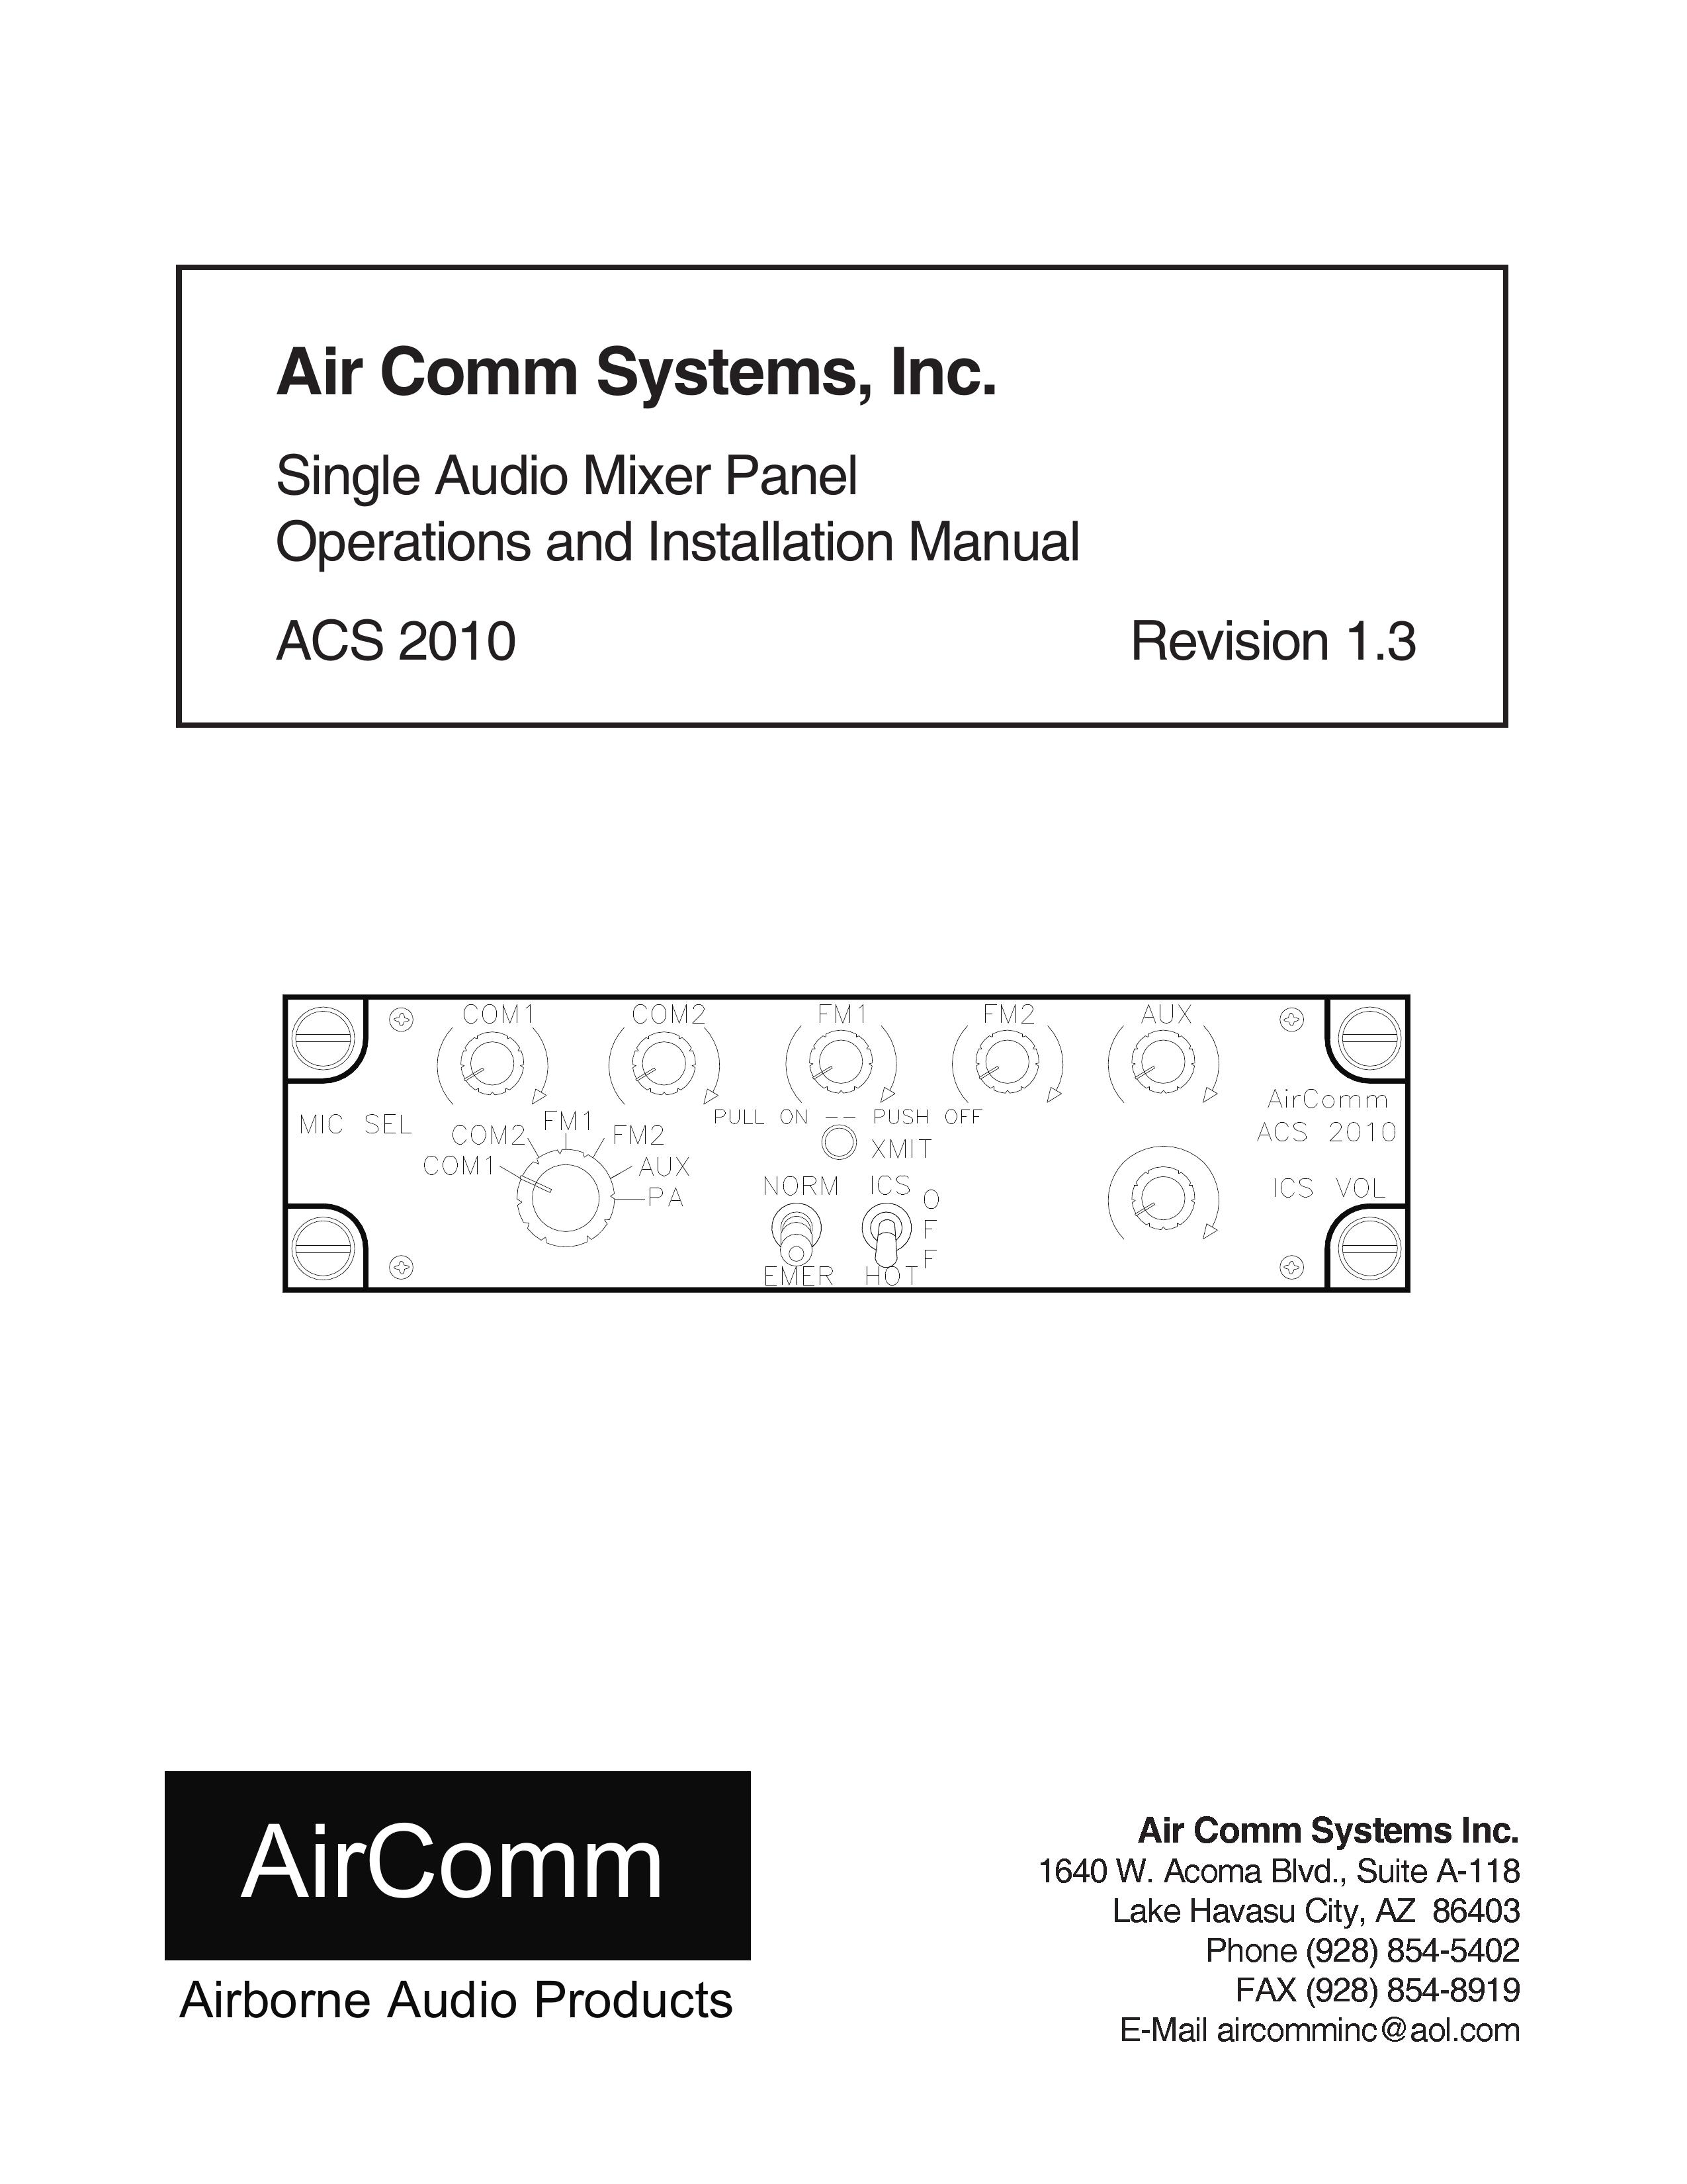 Air Comm Systems ACS 2010 Music Mixer User Manual